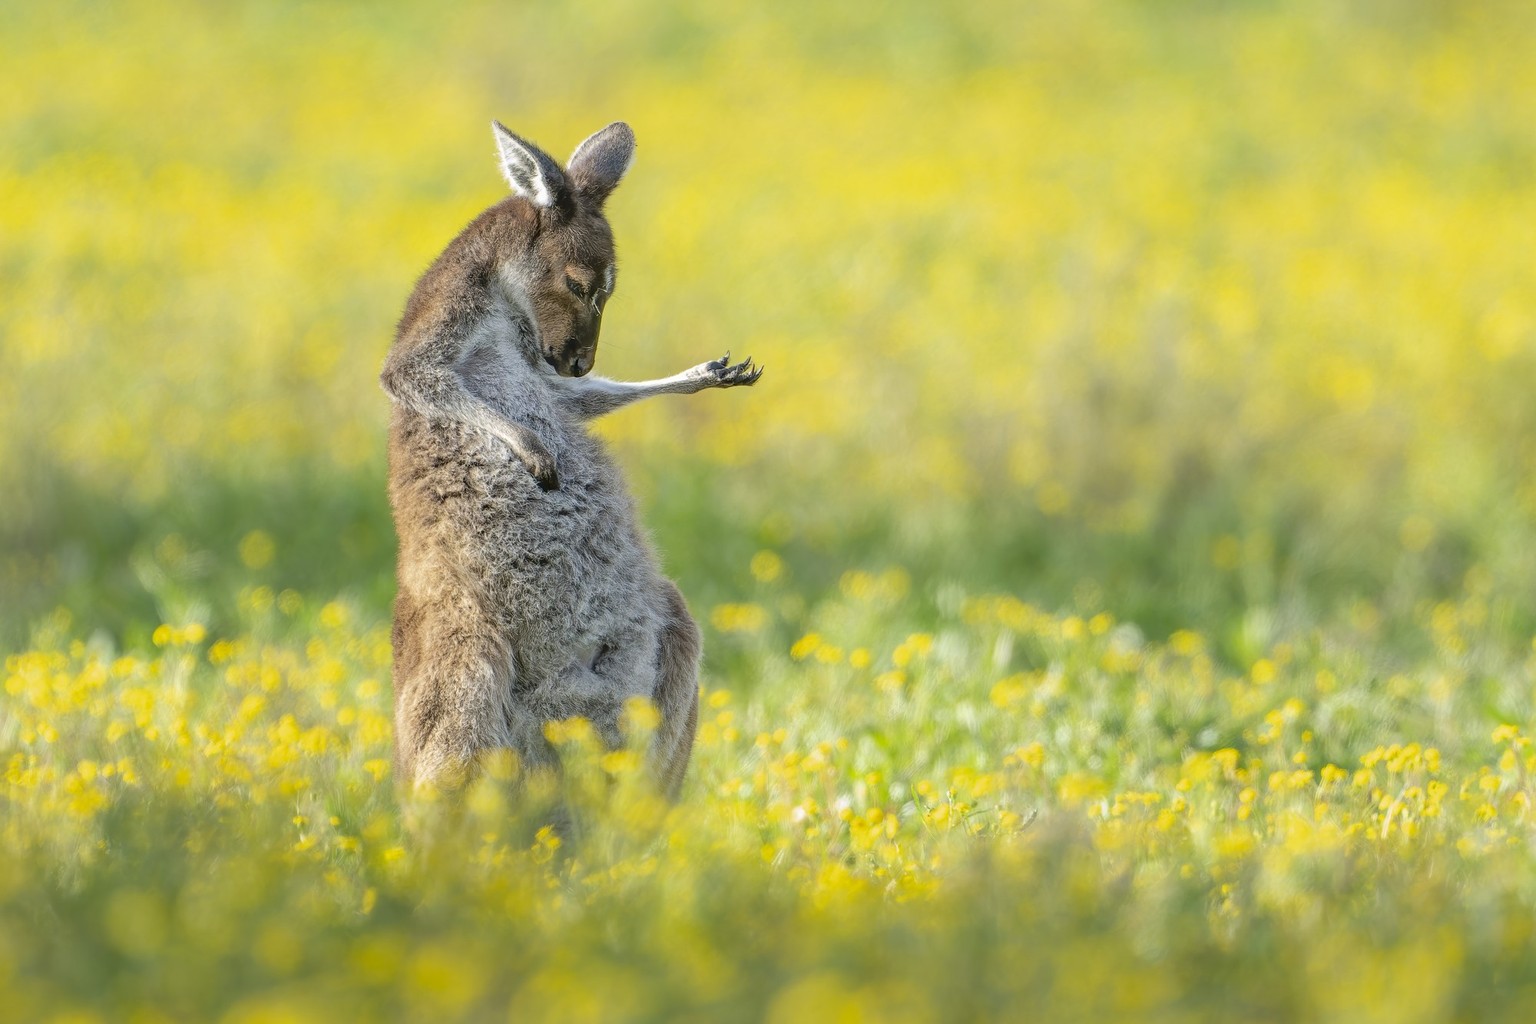 The Comedy Wildlife Photography Awards 2023
Jason Moore
Perth
Australia

Title: Air Guitar Roo
Description: I was driving past a mob of Western Grey Kangaroos feeding in an open field that was filled  ...